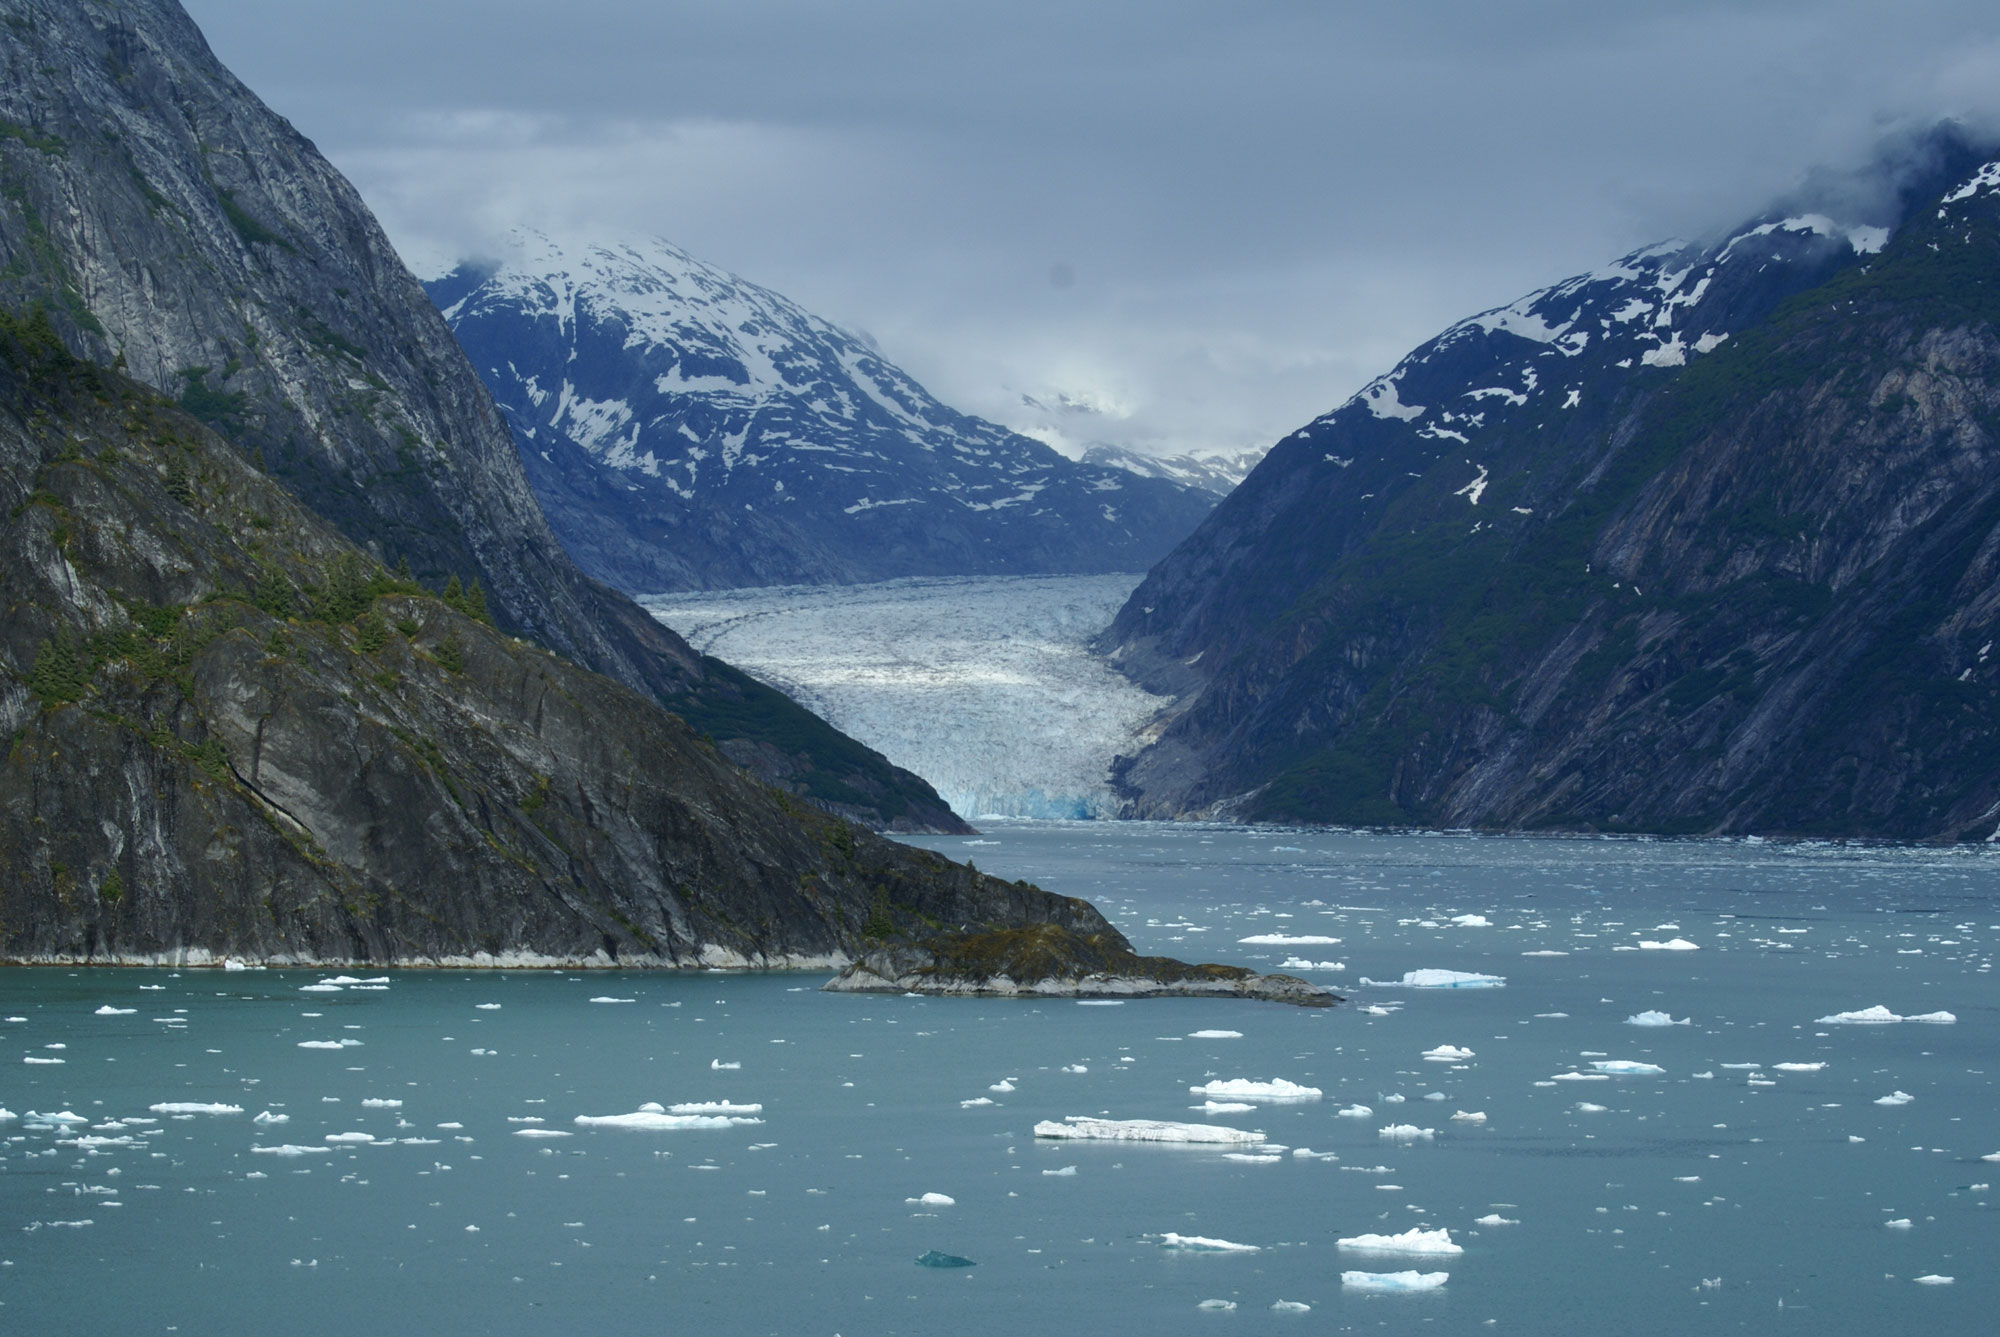 Photograph showing the Dawes Glacier flowing into the water of the Endicott Arm Fjord in Alaska. The photo shows a glacier filling a narrow valley between mountains. The glacier ends at the surface of the water in the fjord, with also has slopes rising to either side.